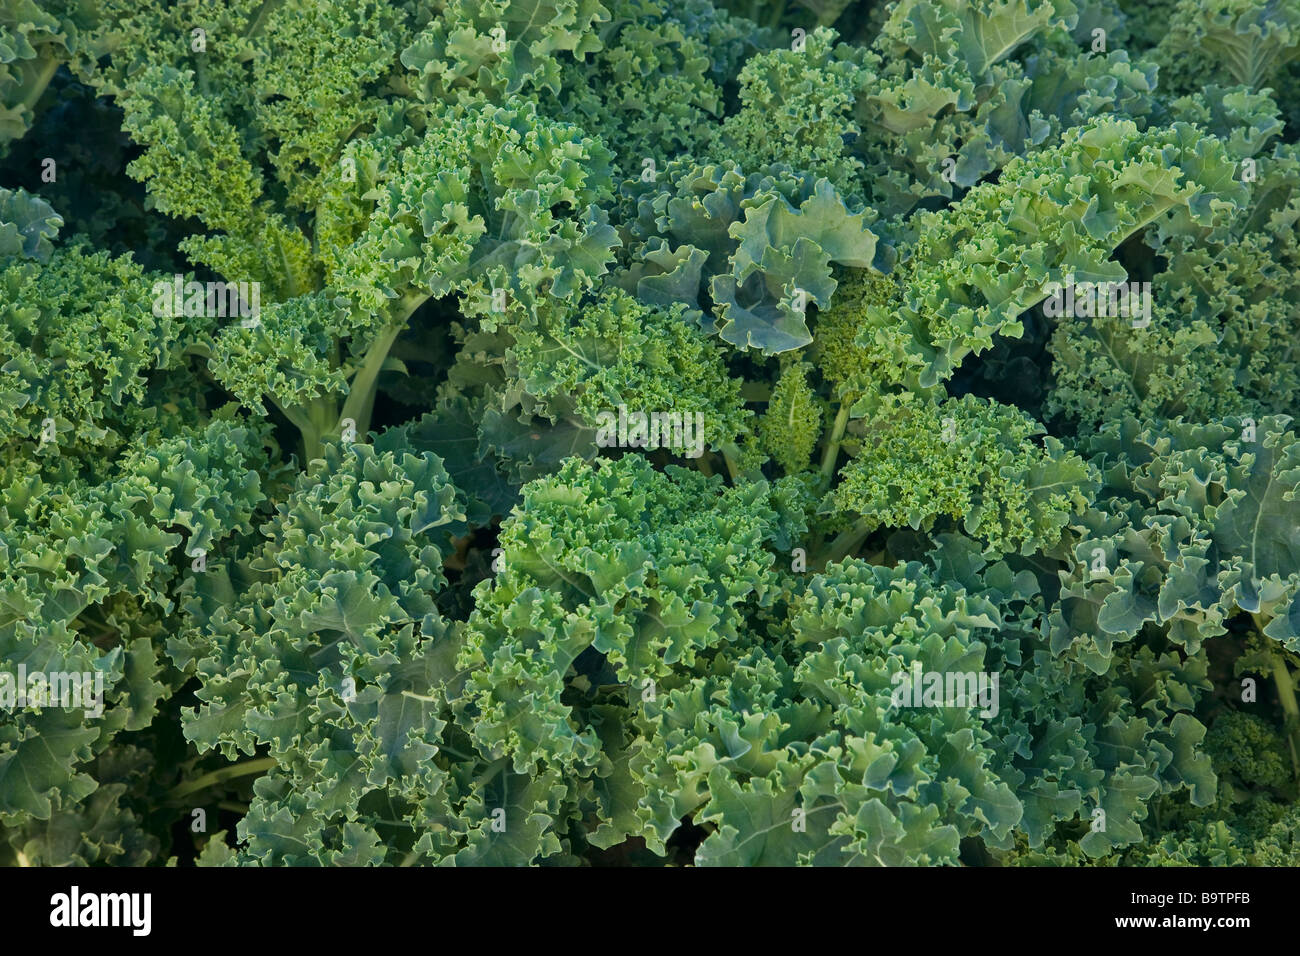 Closeup of  Green Kale leaves, organically growing. Stock Photo